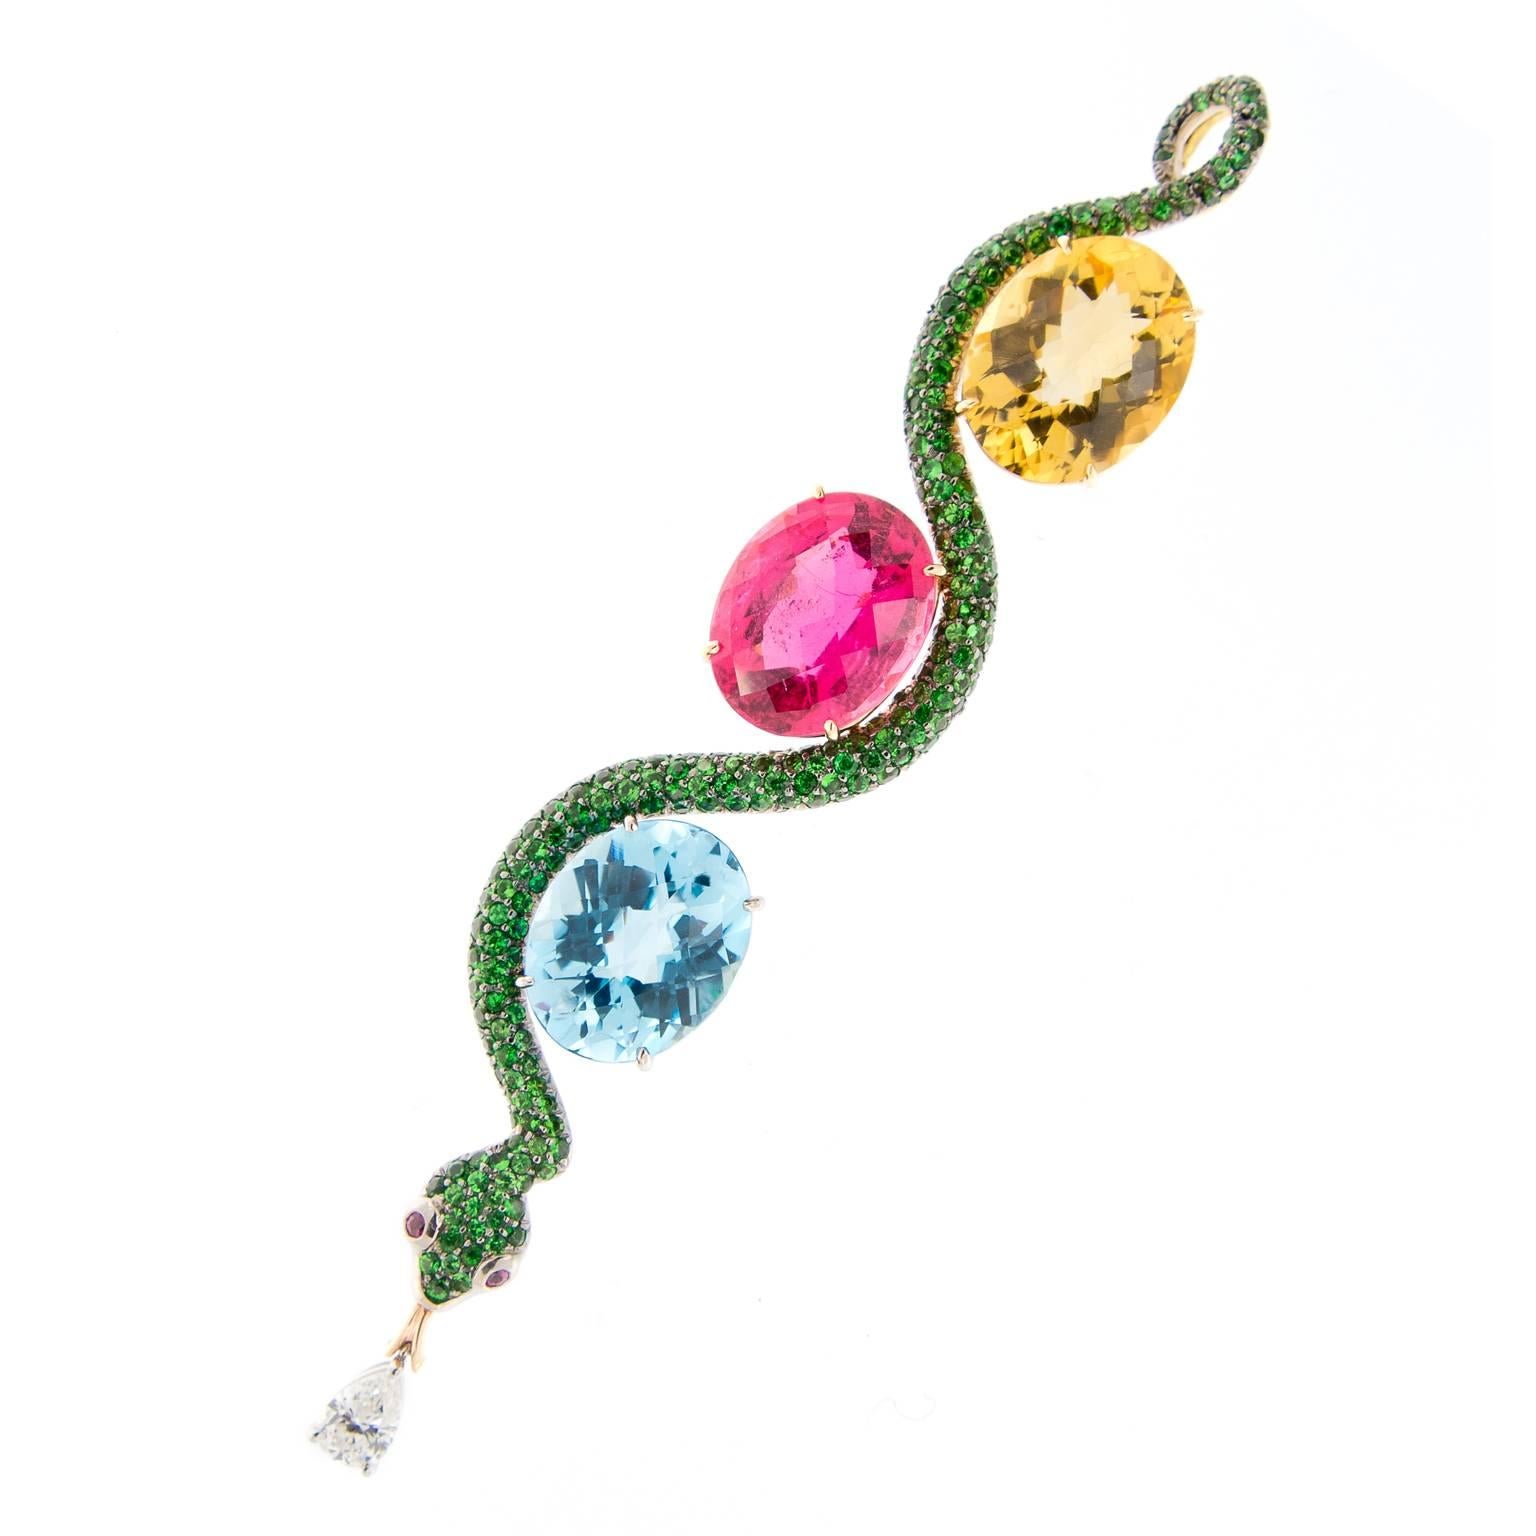 Stunning one-of-a-kind pendant displays a beautiful combination of color! Contemporary serpent design is crafted in 18k yellow gold and contains citrine, rubelite, blue topaz, tsavorites and a pear shaped diamond drop. Pendent drops from a 16.5 inch